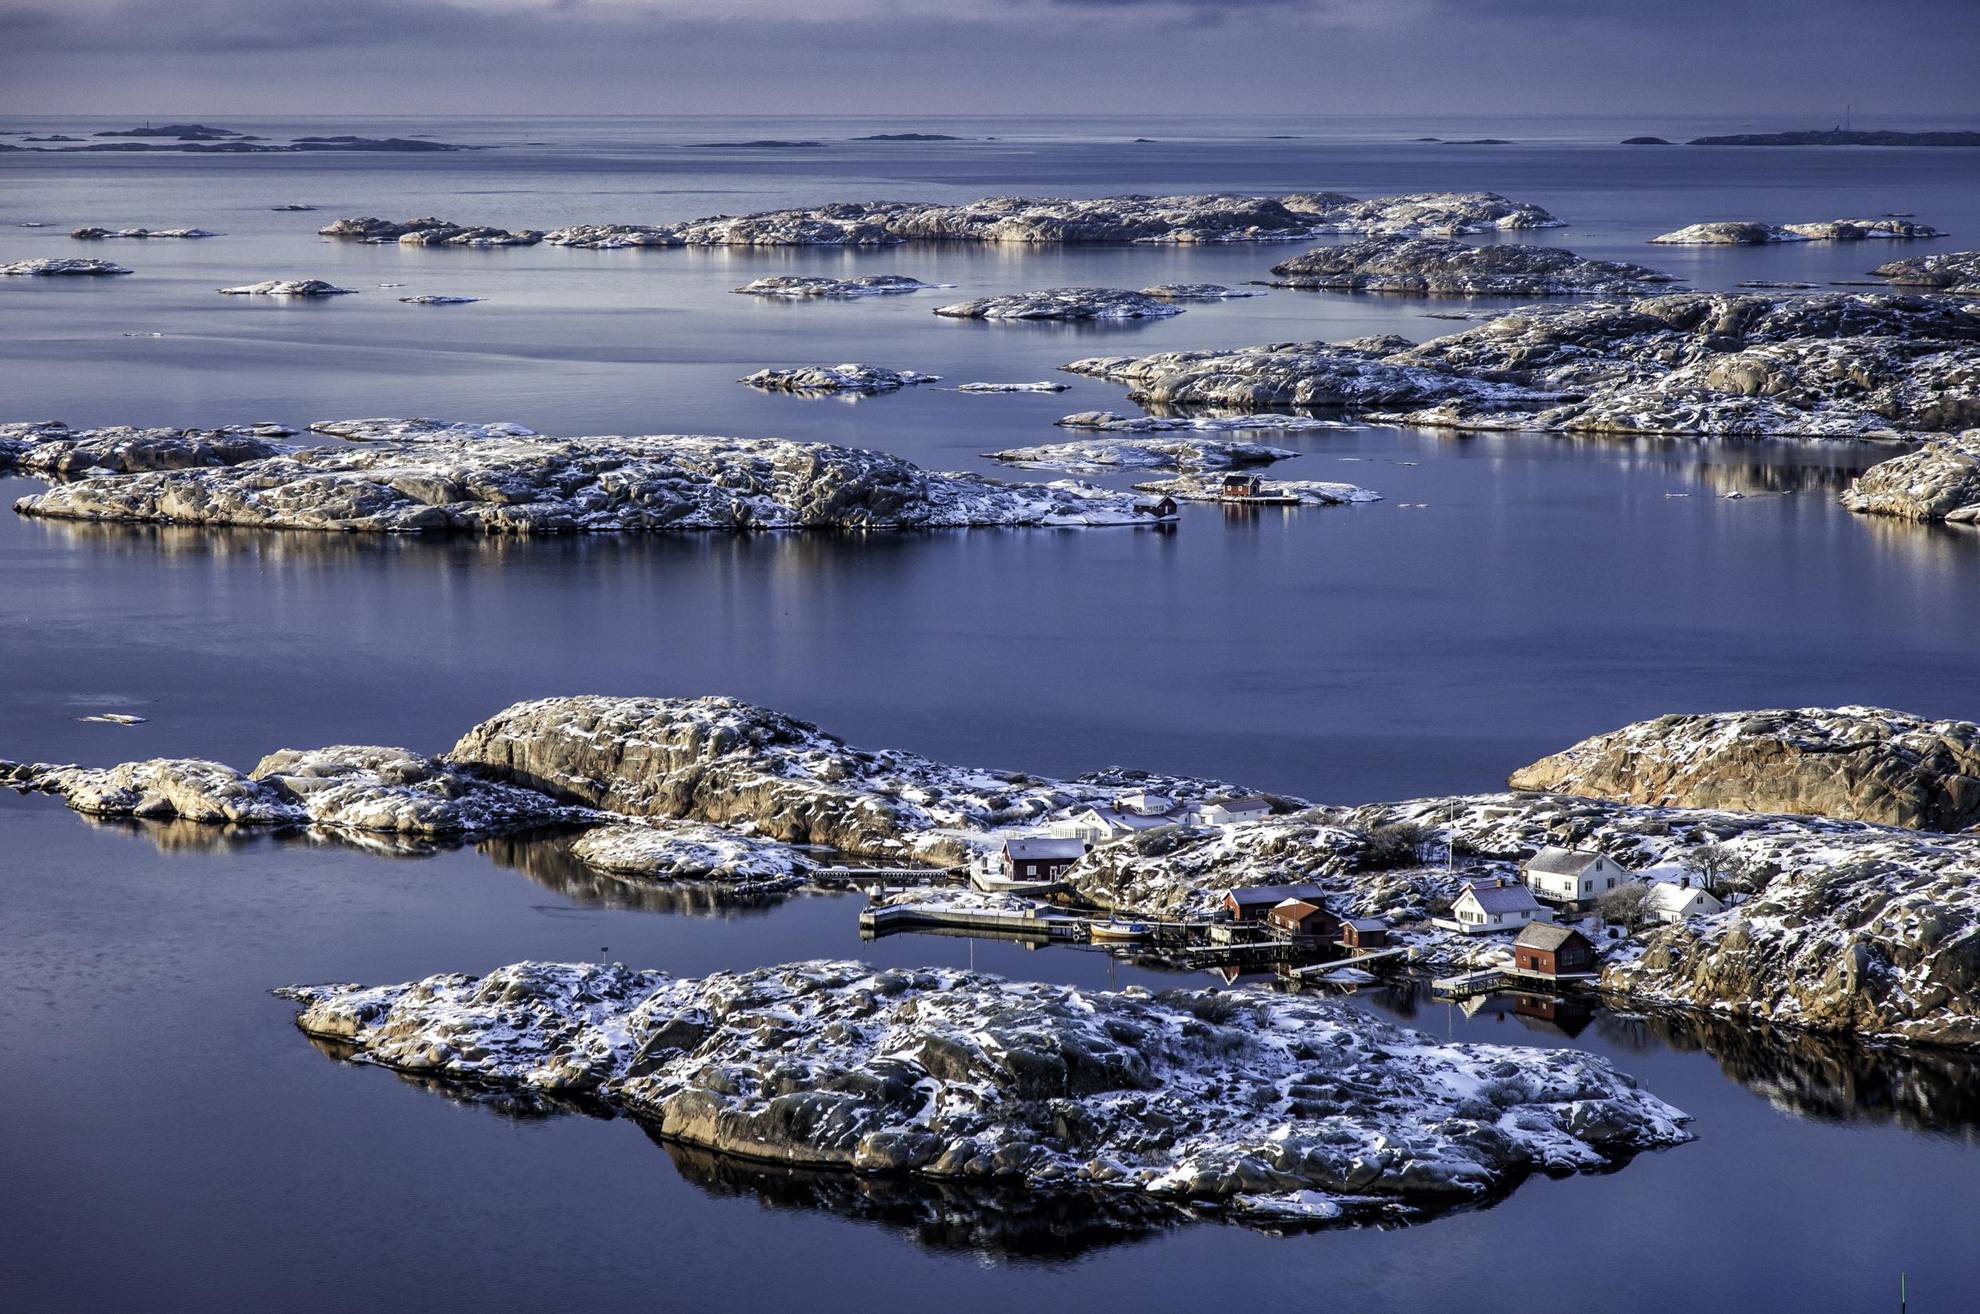 Scenic view of the west coast archipelago at winter. The houses and islets are covered in frost and a little snow.